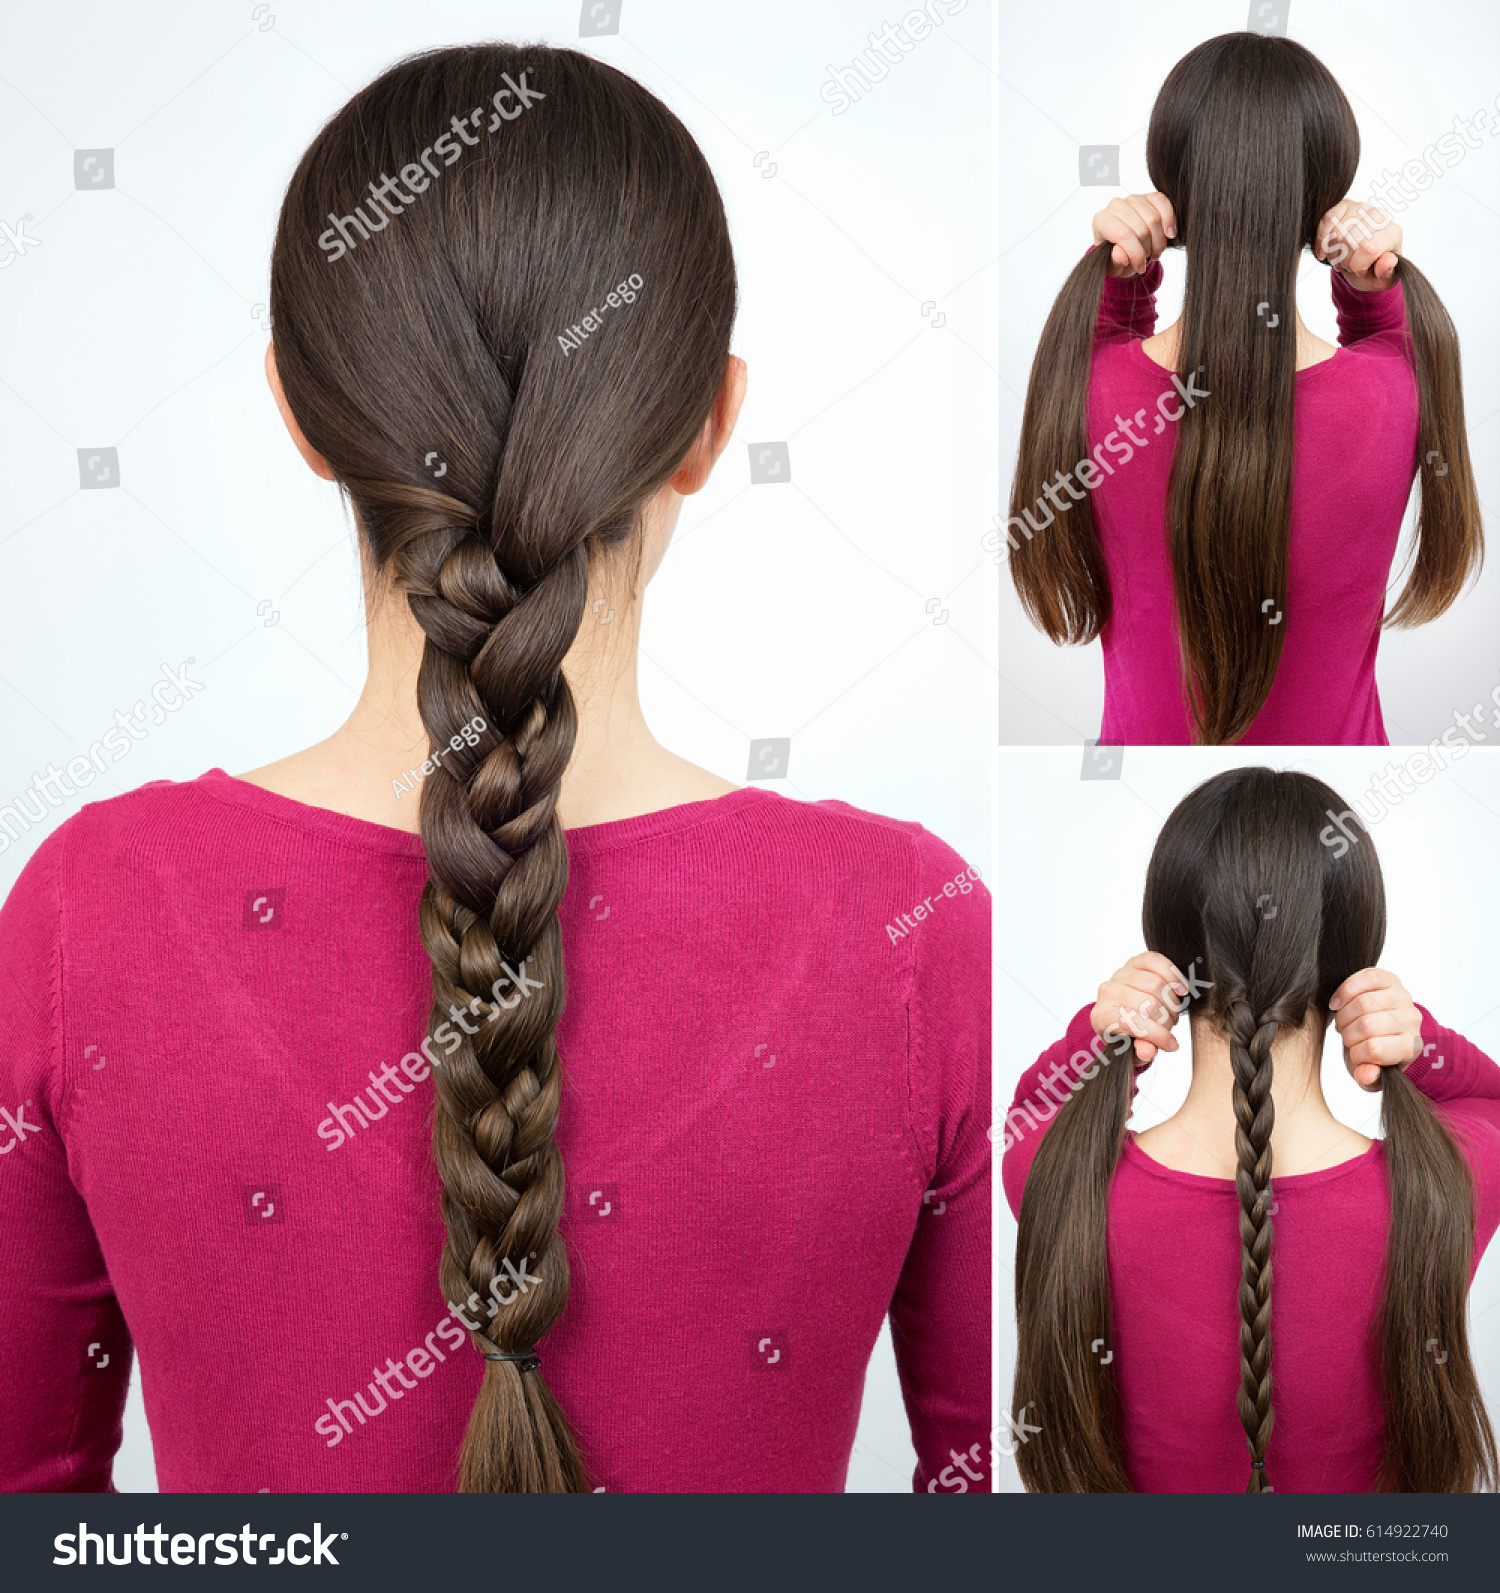 Tutorial Photo Step By Step Simple Stock Image Download Now